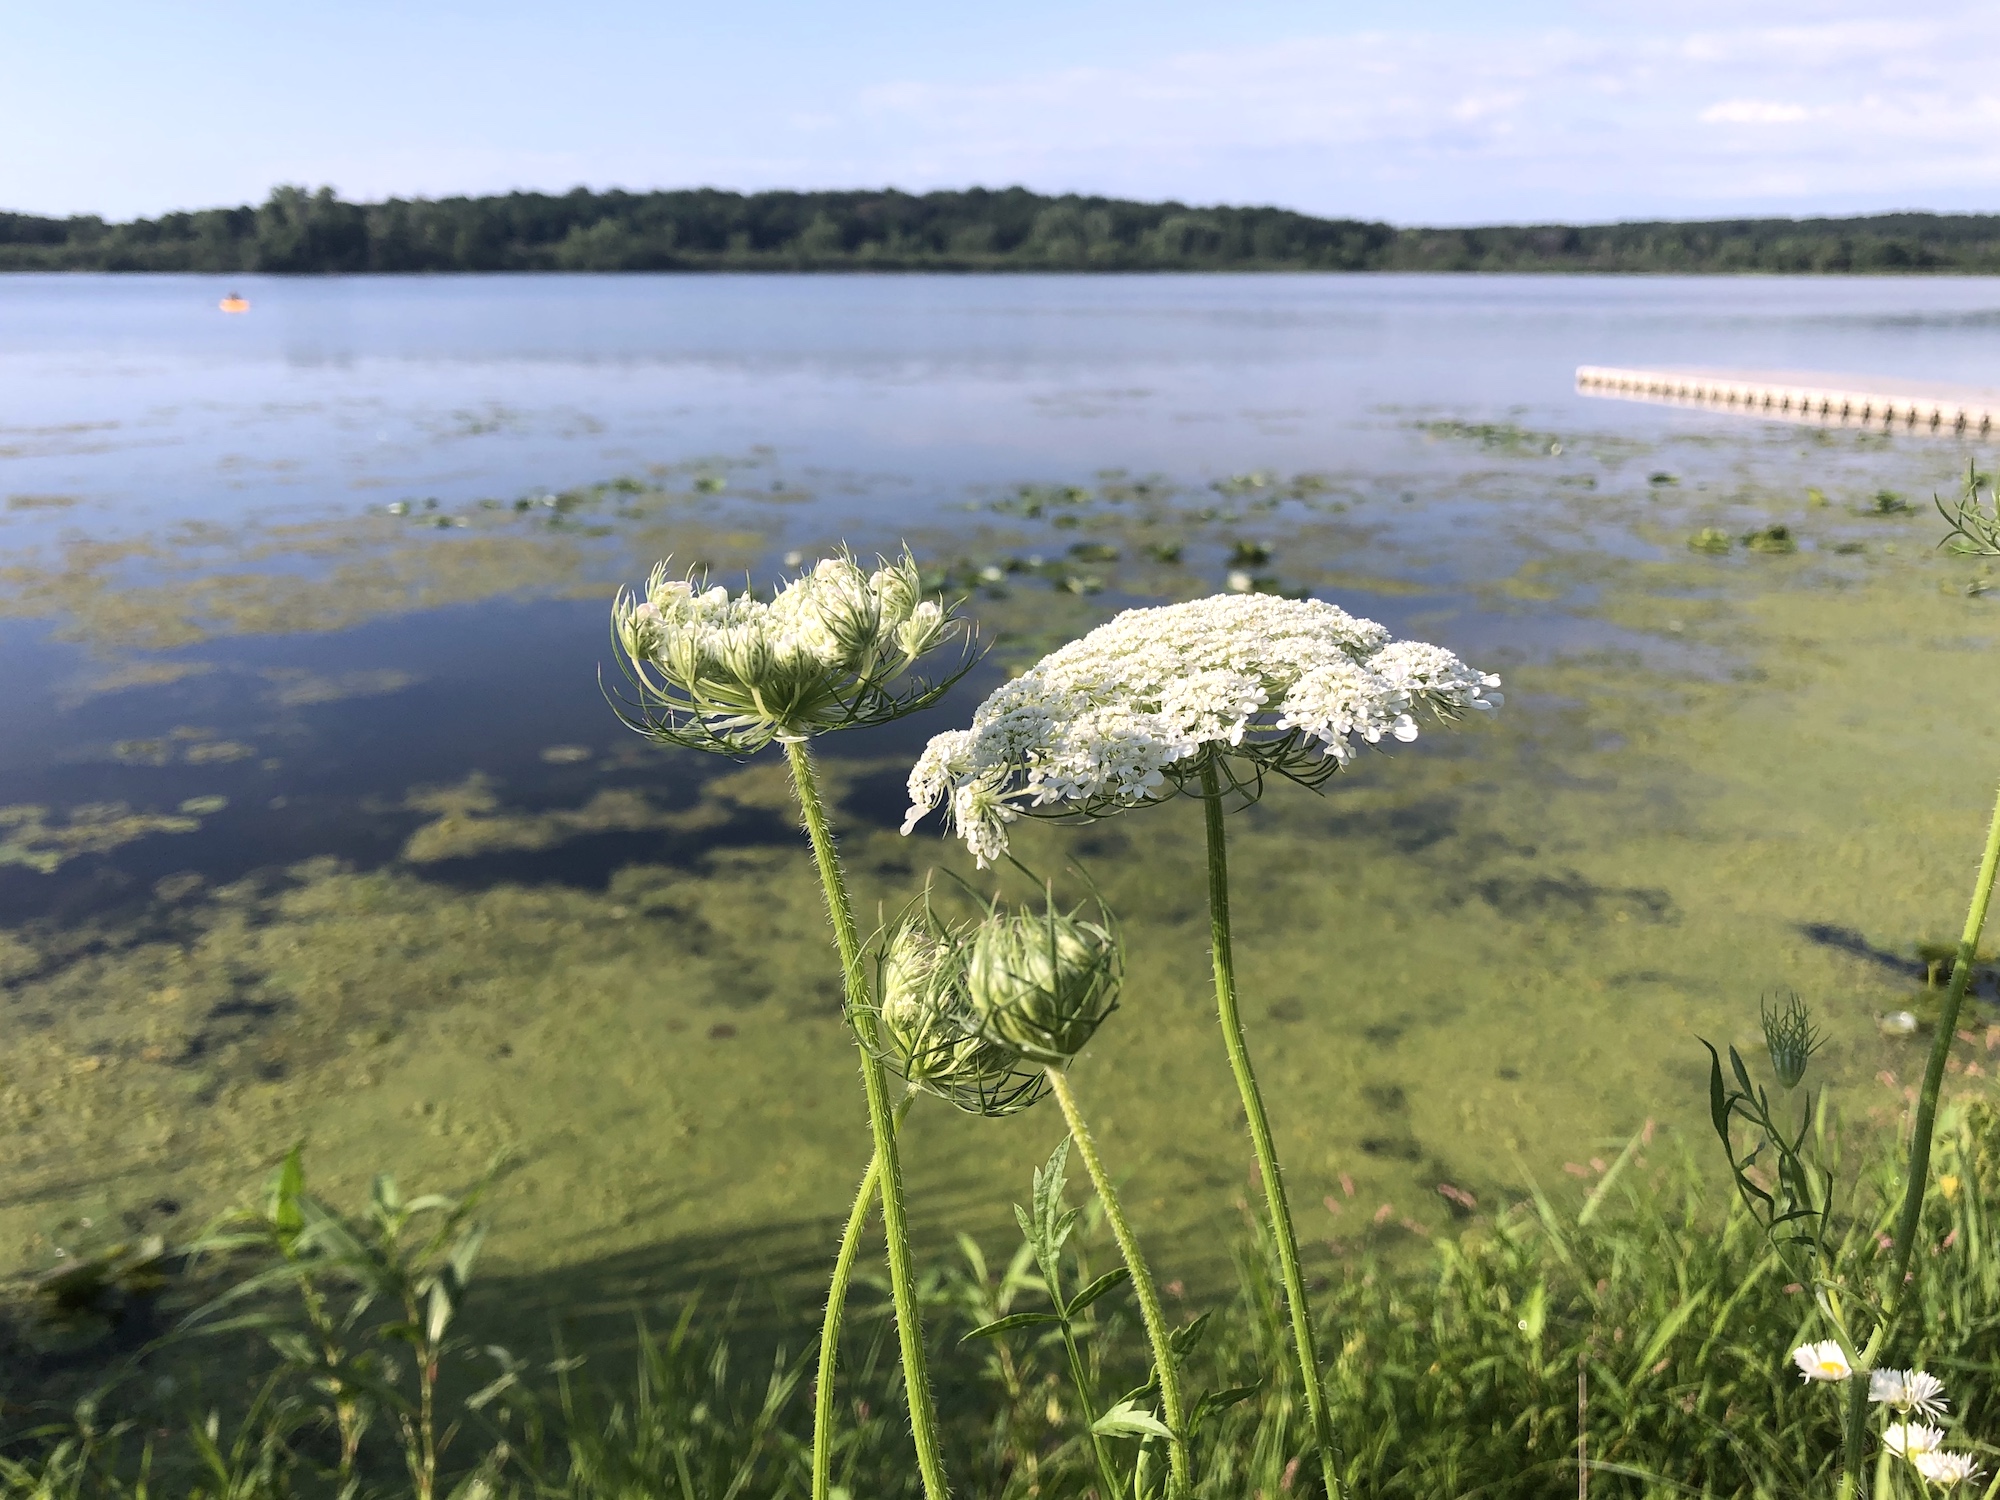 Queen Anne's Lace on shore of Lake Wingra in Wingra Park in Madison, WI on August 23, 2020.